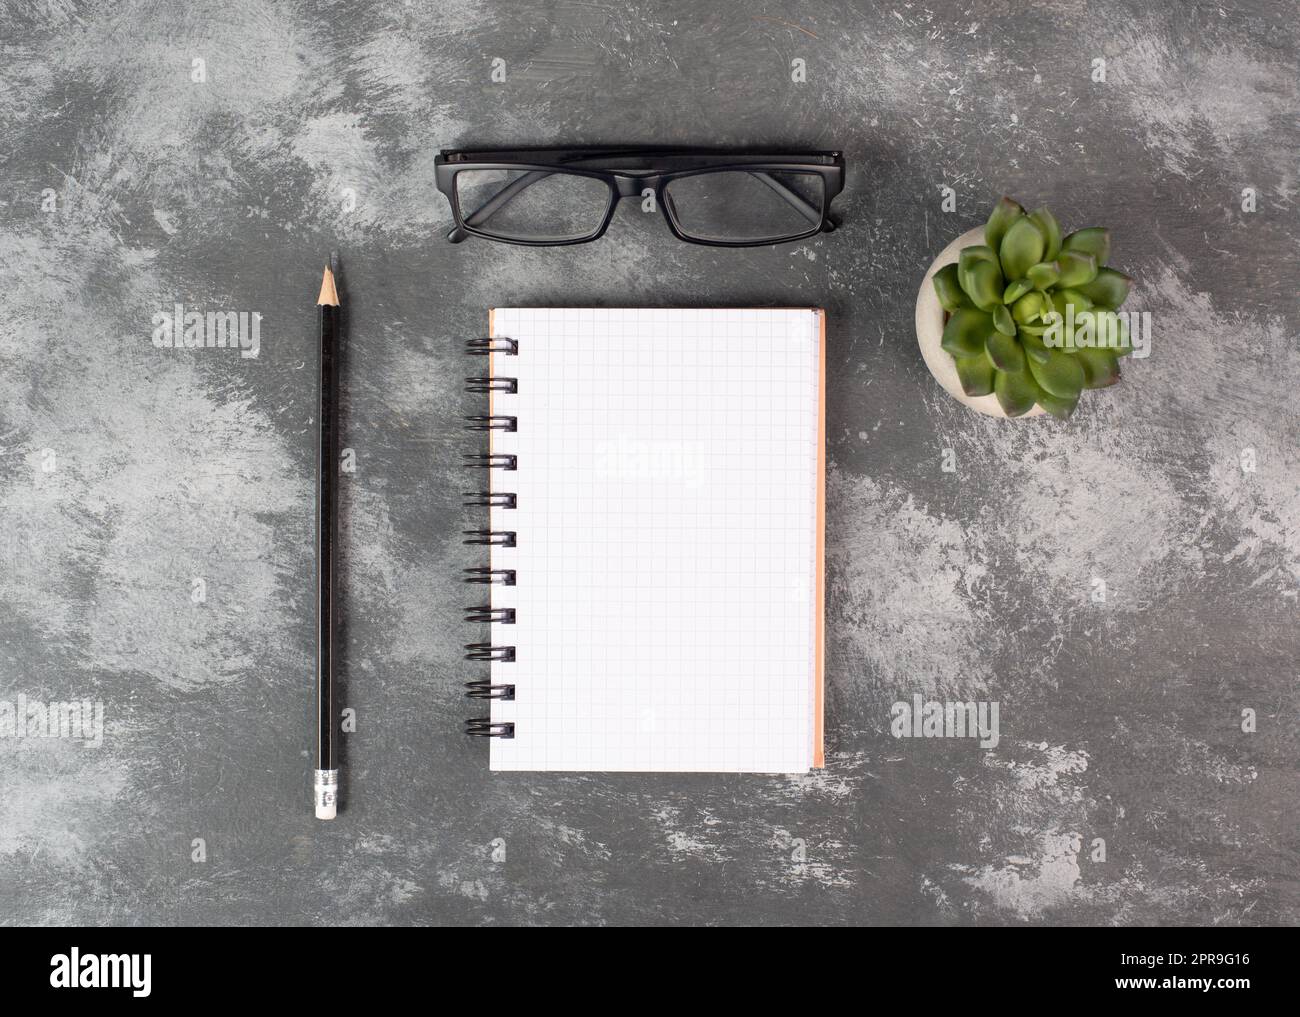 Empty notebook with a pen, eyeglasses and a cactus on a background, brainstorming for new ideas, writing a message, taking a break, home office desk Stock Photo